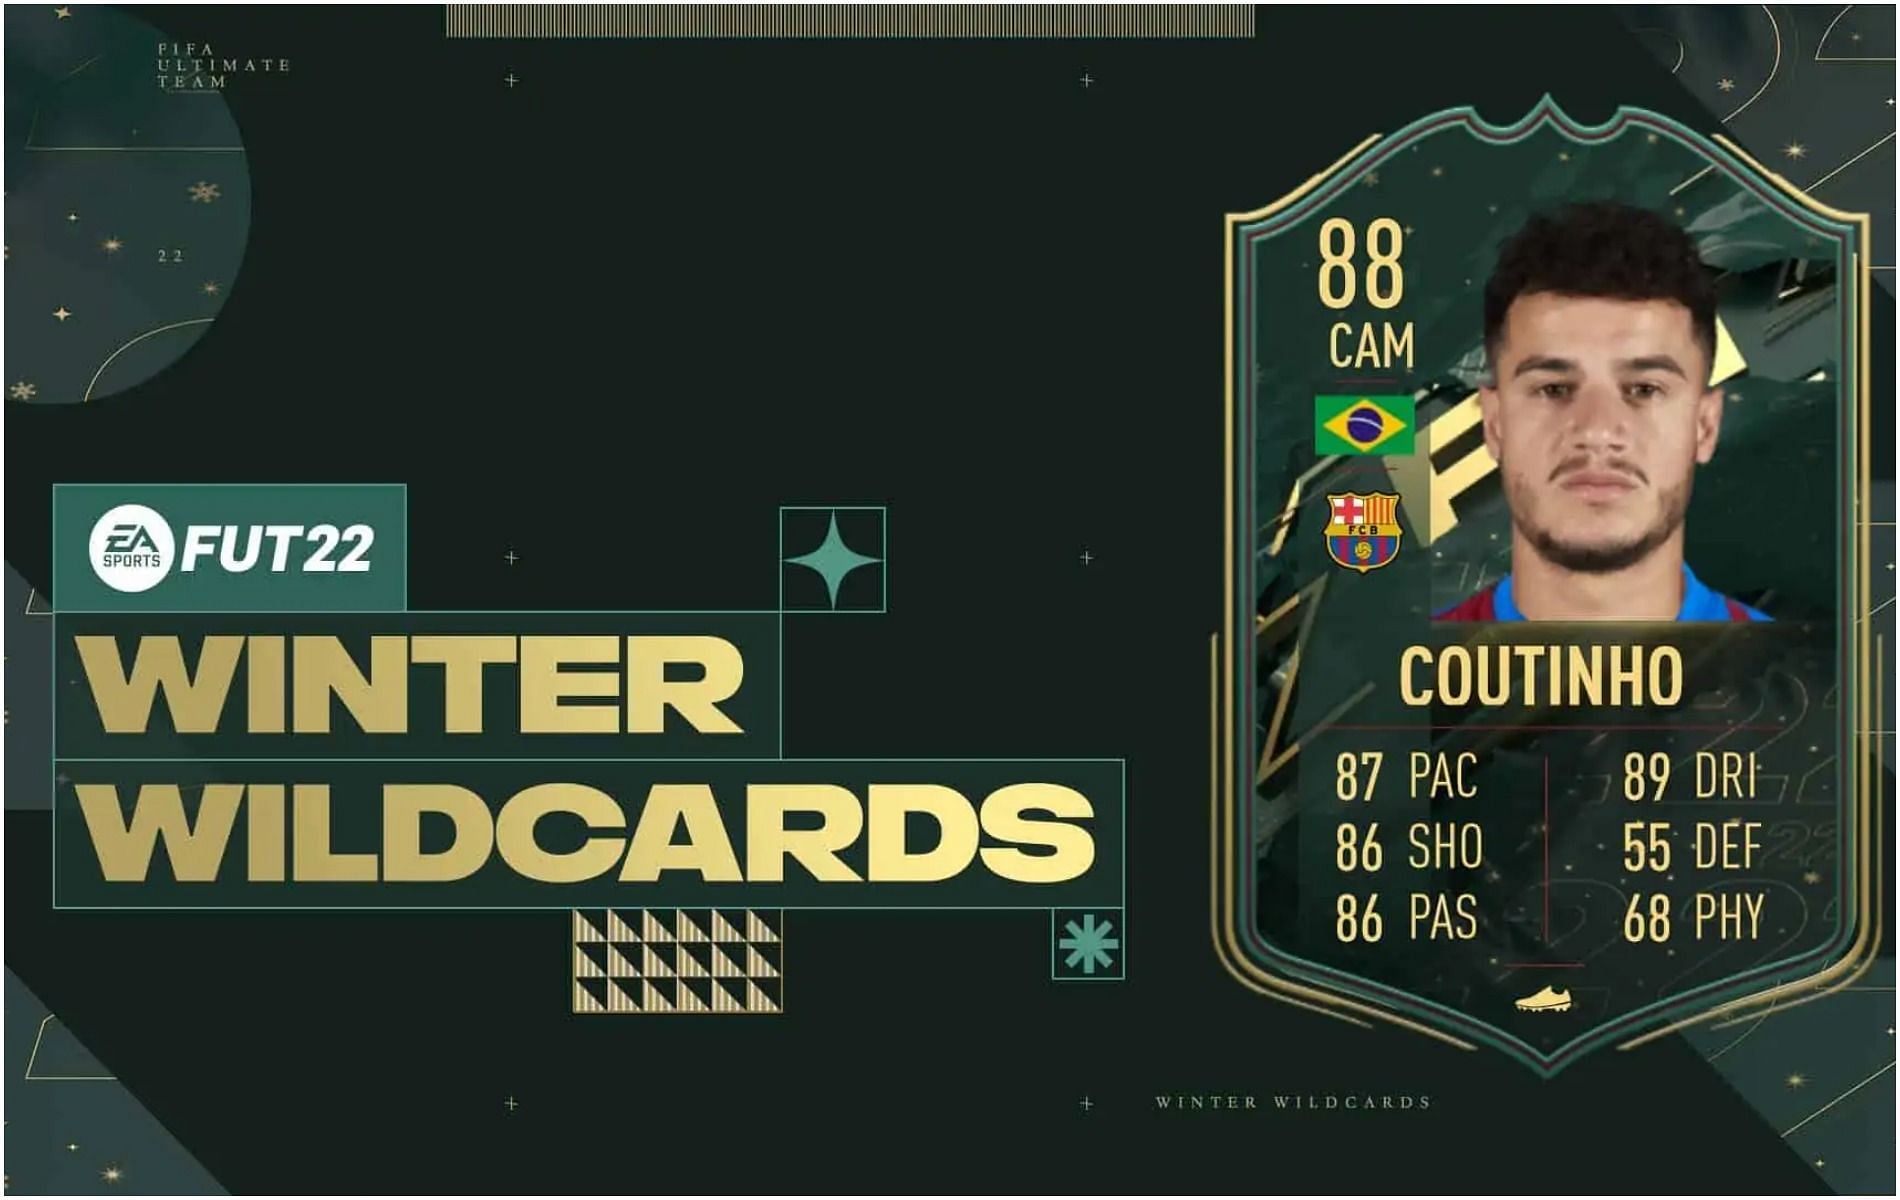 Philippe Coutinho Winter Wildcards SBC is now live in FIFA 22 Ultimate Team (Image via EA Sports)